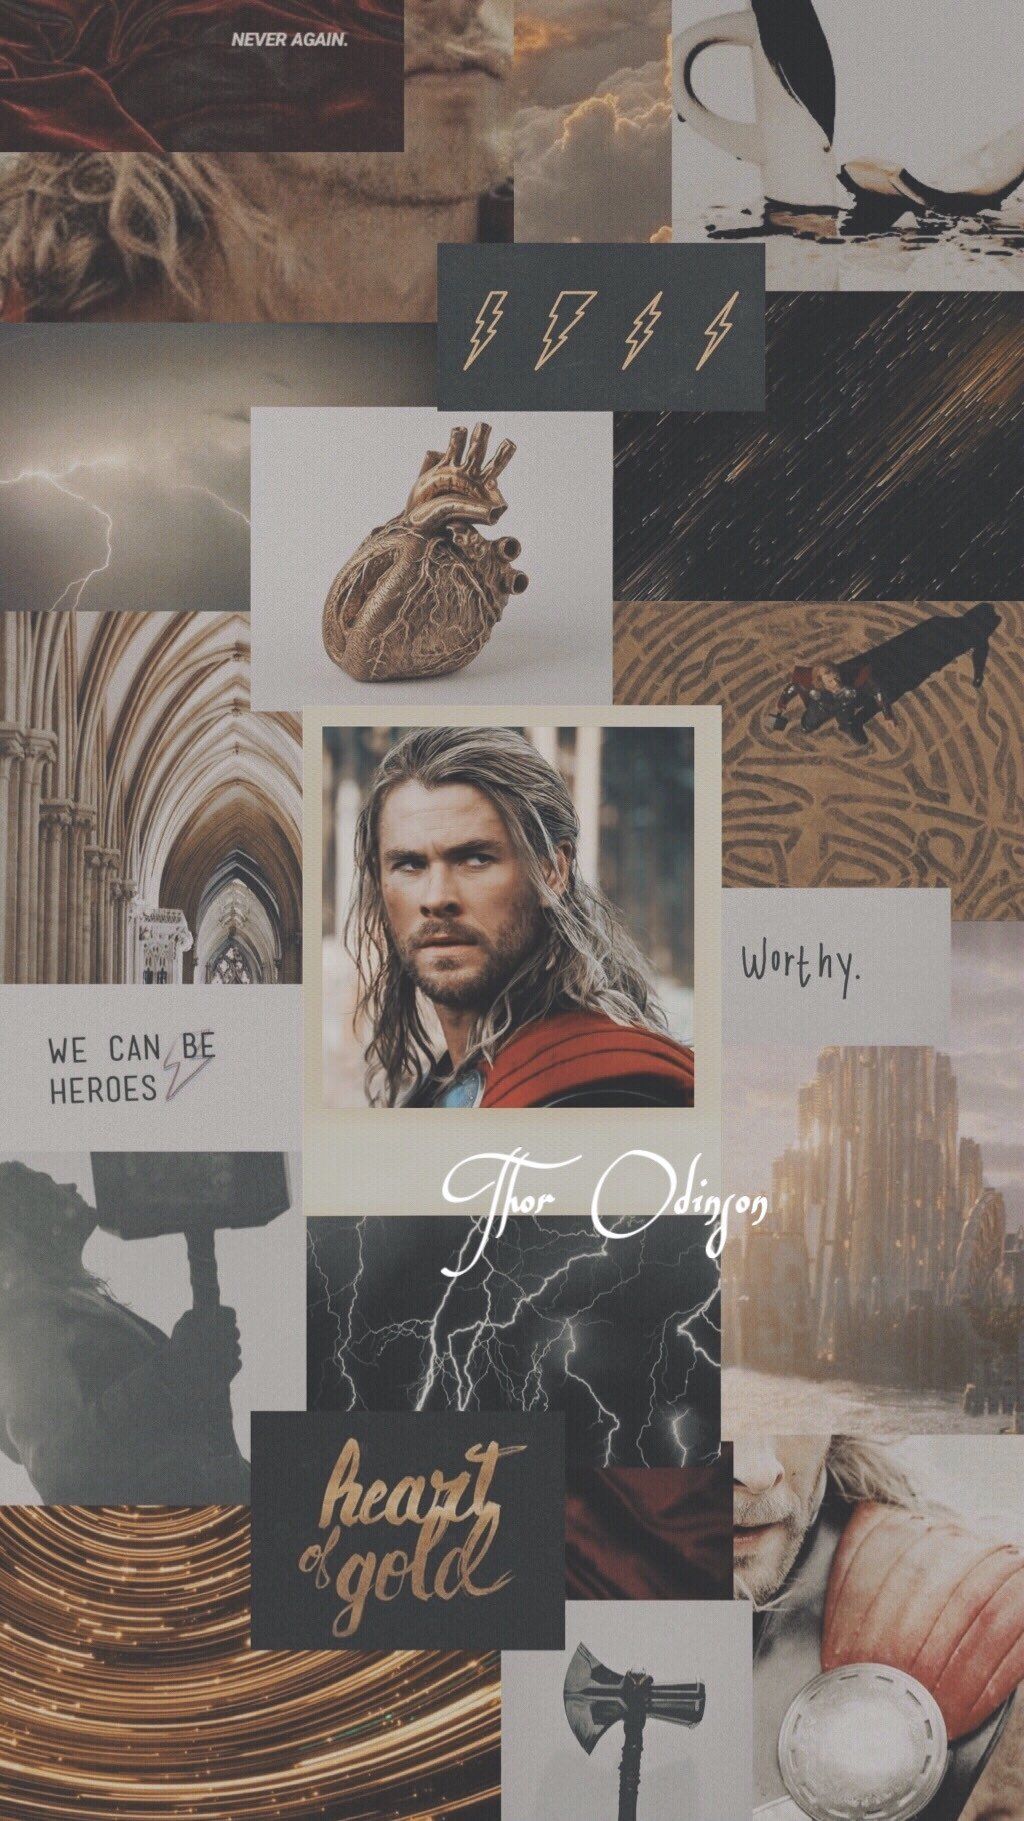 Aesthetic Thor wallpaper, Thor Odinson, worthy, heart of gold, never again, we can be heroes - Thor